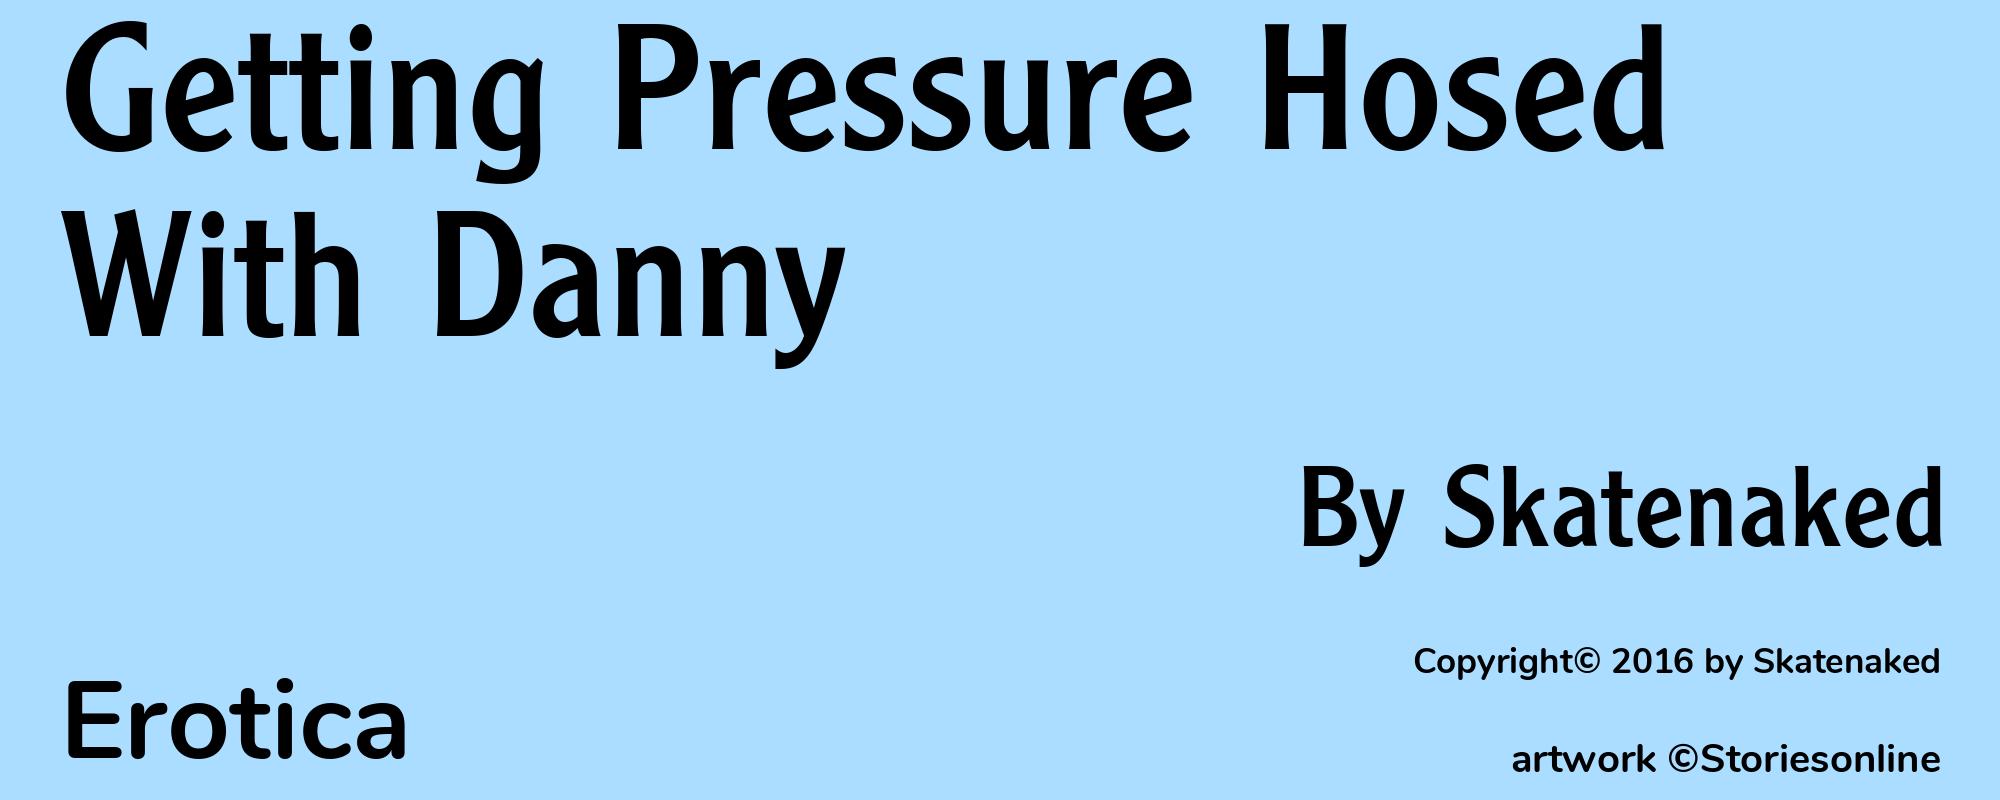 Getting Pressure Hosed With Danny - Cover